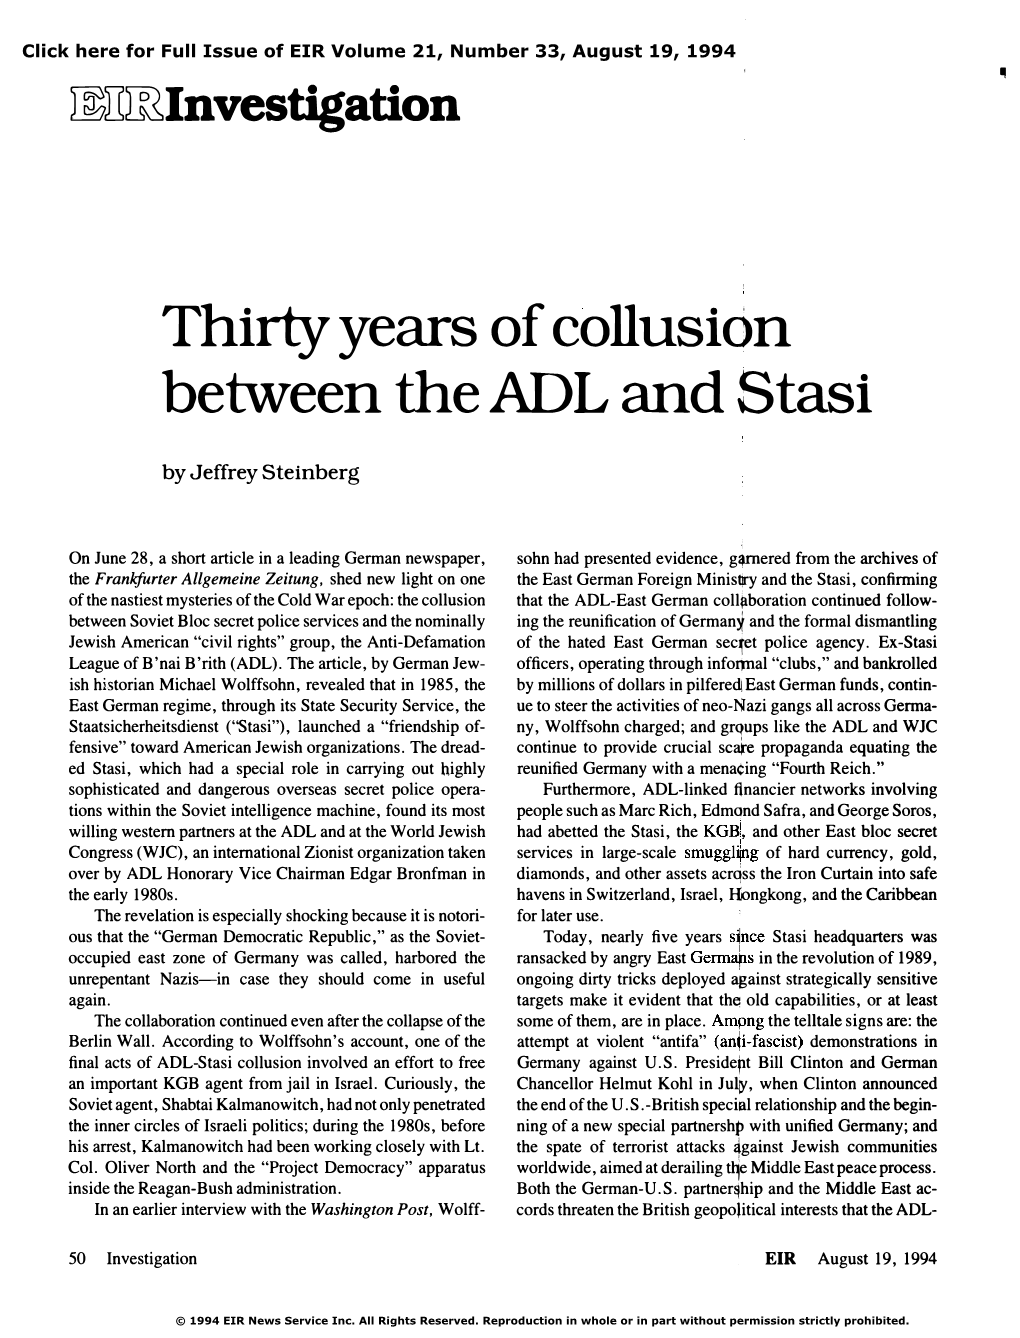 Thirty Years of Collusion Between the ADL and Stasi